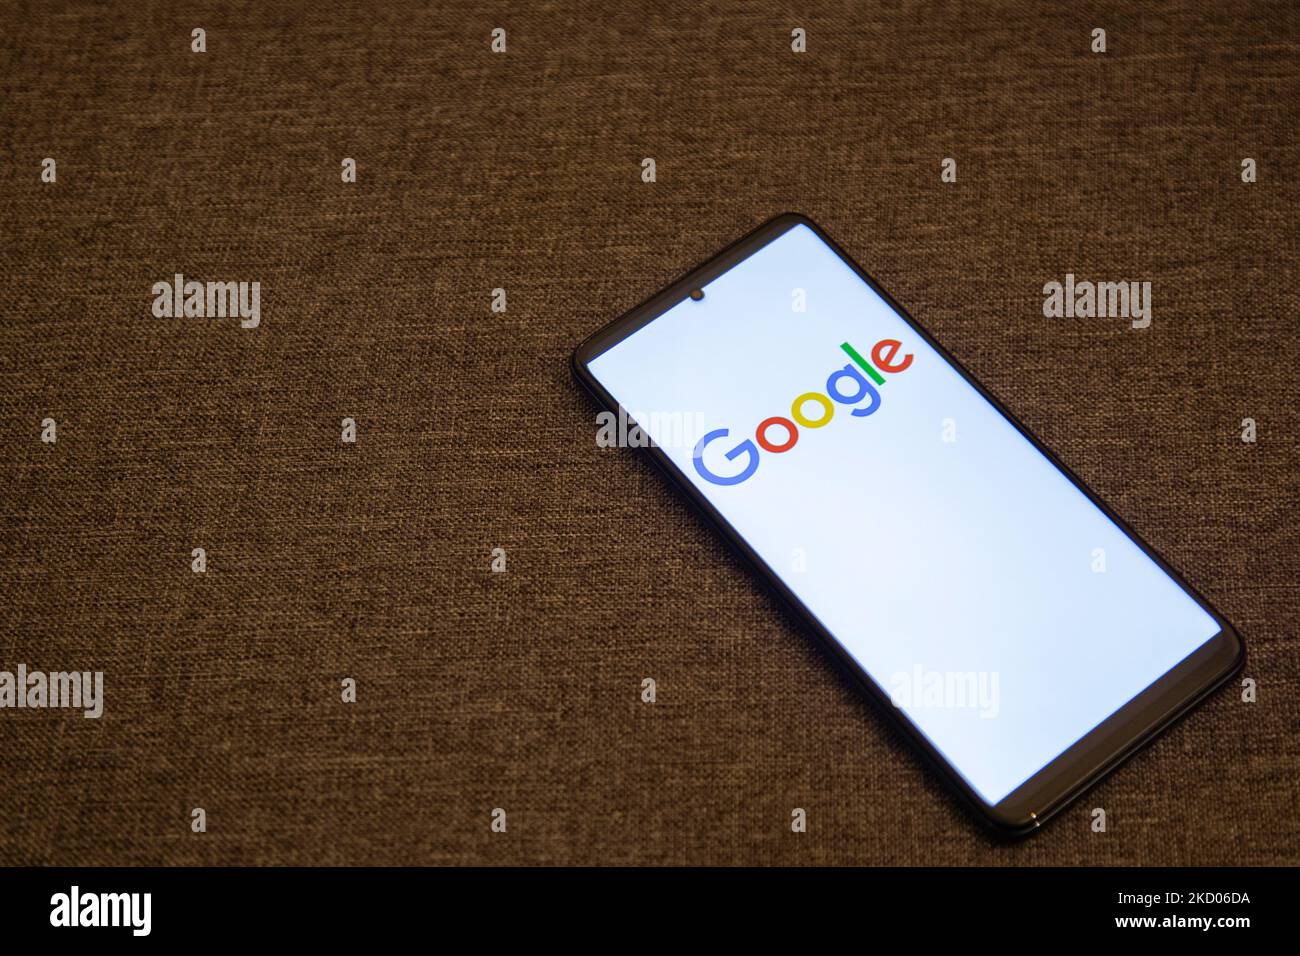 Google closeup logo displayed on a phone screen, smartphone the logo or the search engine in various backgrounds like keyboard, dark illuminated texture or a computer screen, as seen in this multiple exposure illustration, the company's symbol is globally recognized. Google, LLC is an American tech giant, a multinational technology company that specializes in Internet-related services and products, which include online advertising technologies, a search engine, cloud computing, software, and hardware. It is considered one of the Big Four - Big Tech technology companies in the U.S. and globally Stock Photo